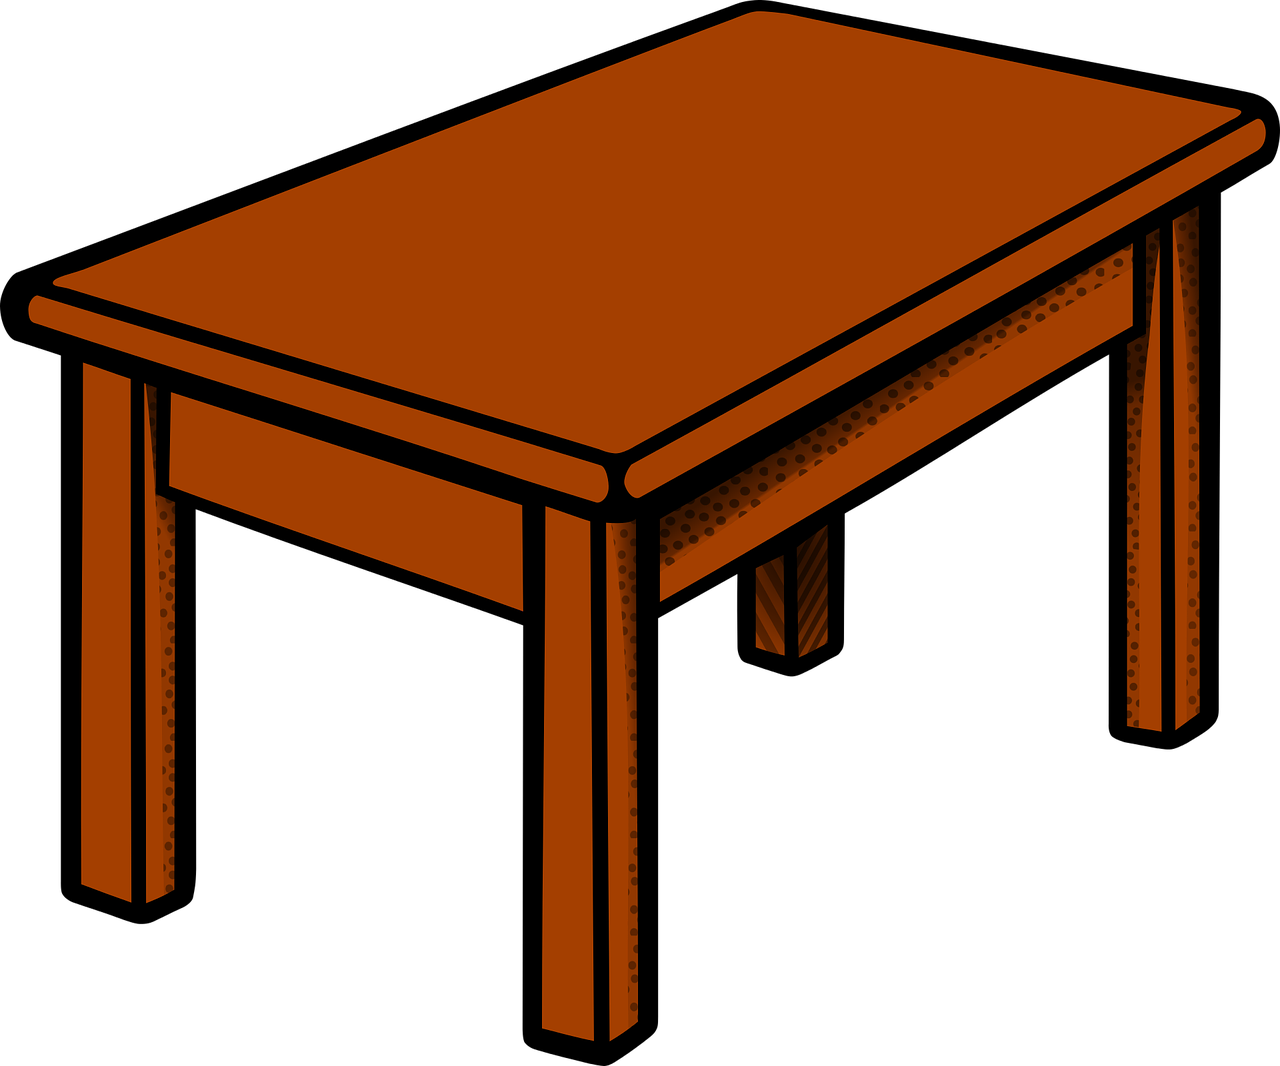 What are the uses of table? 